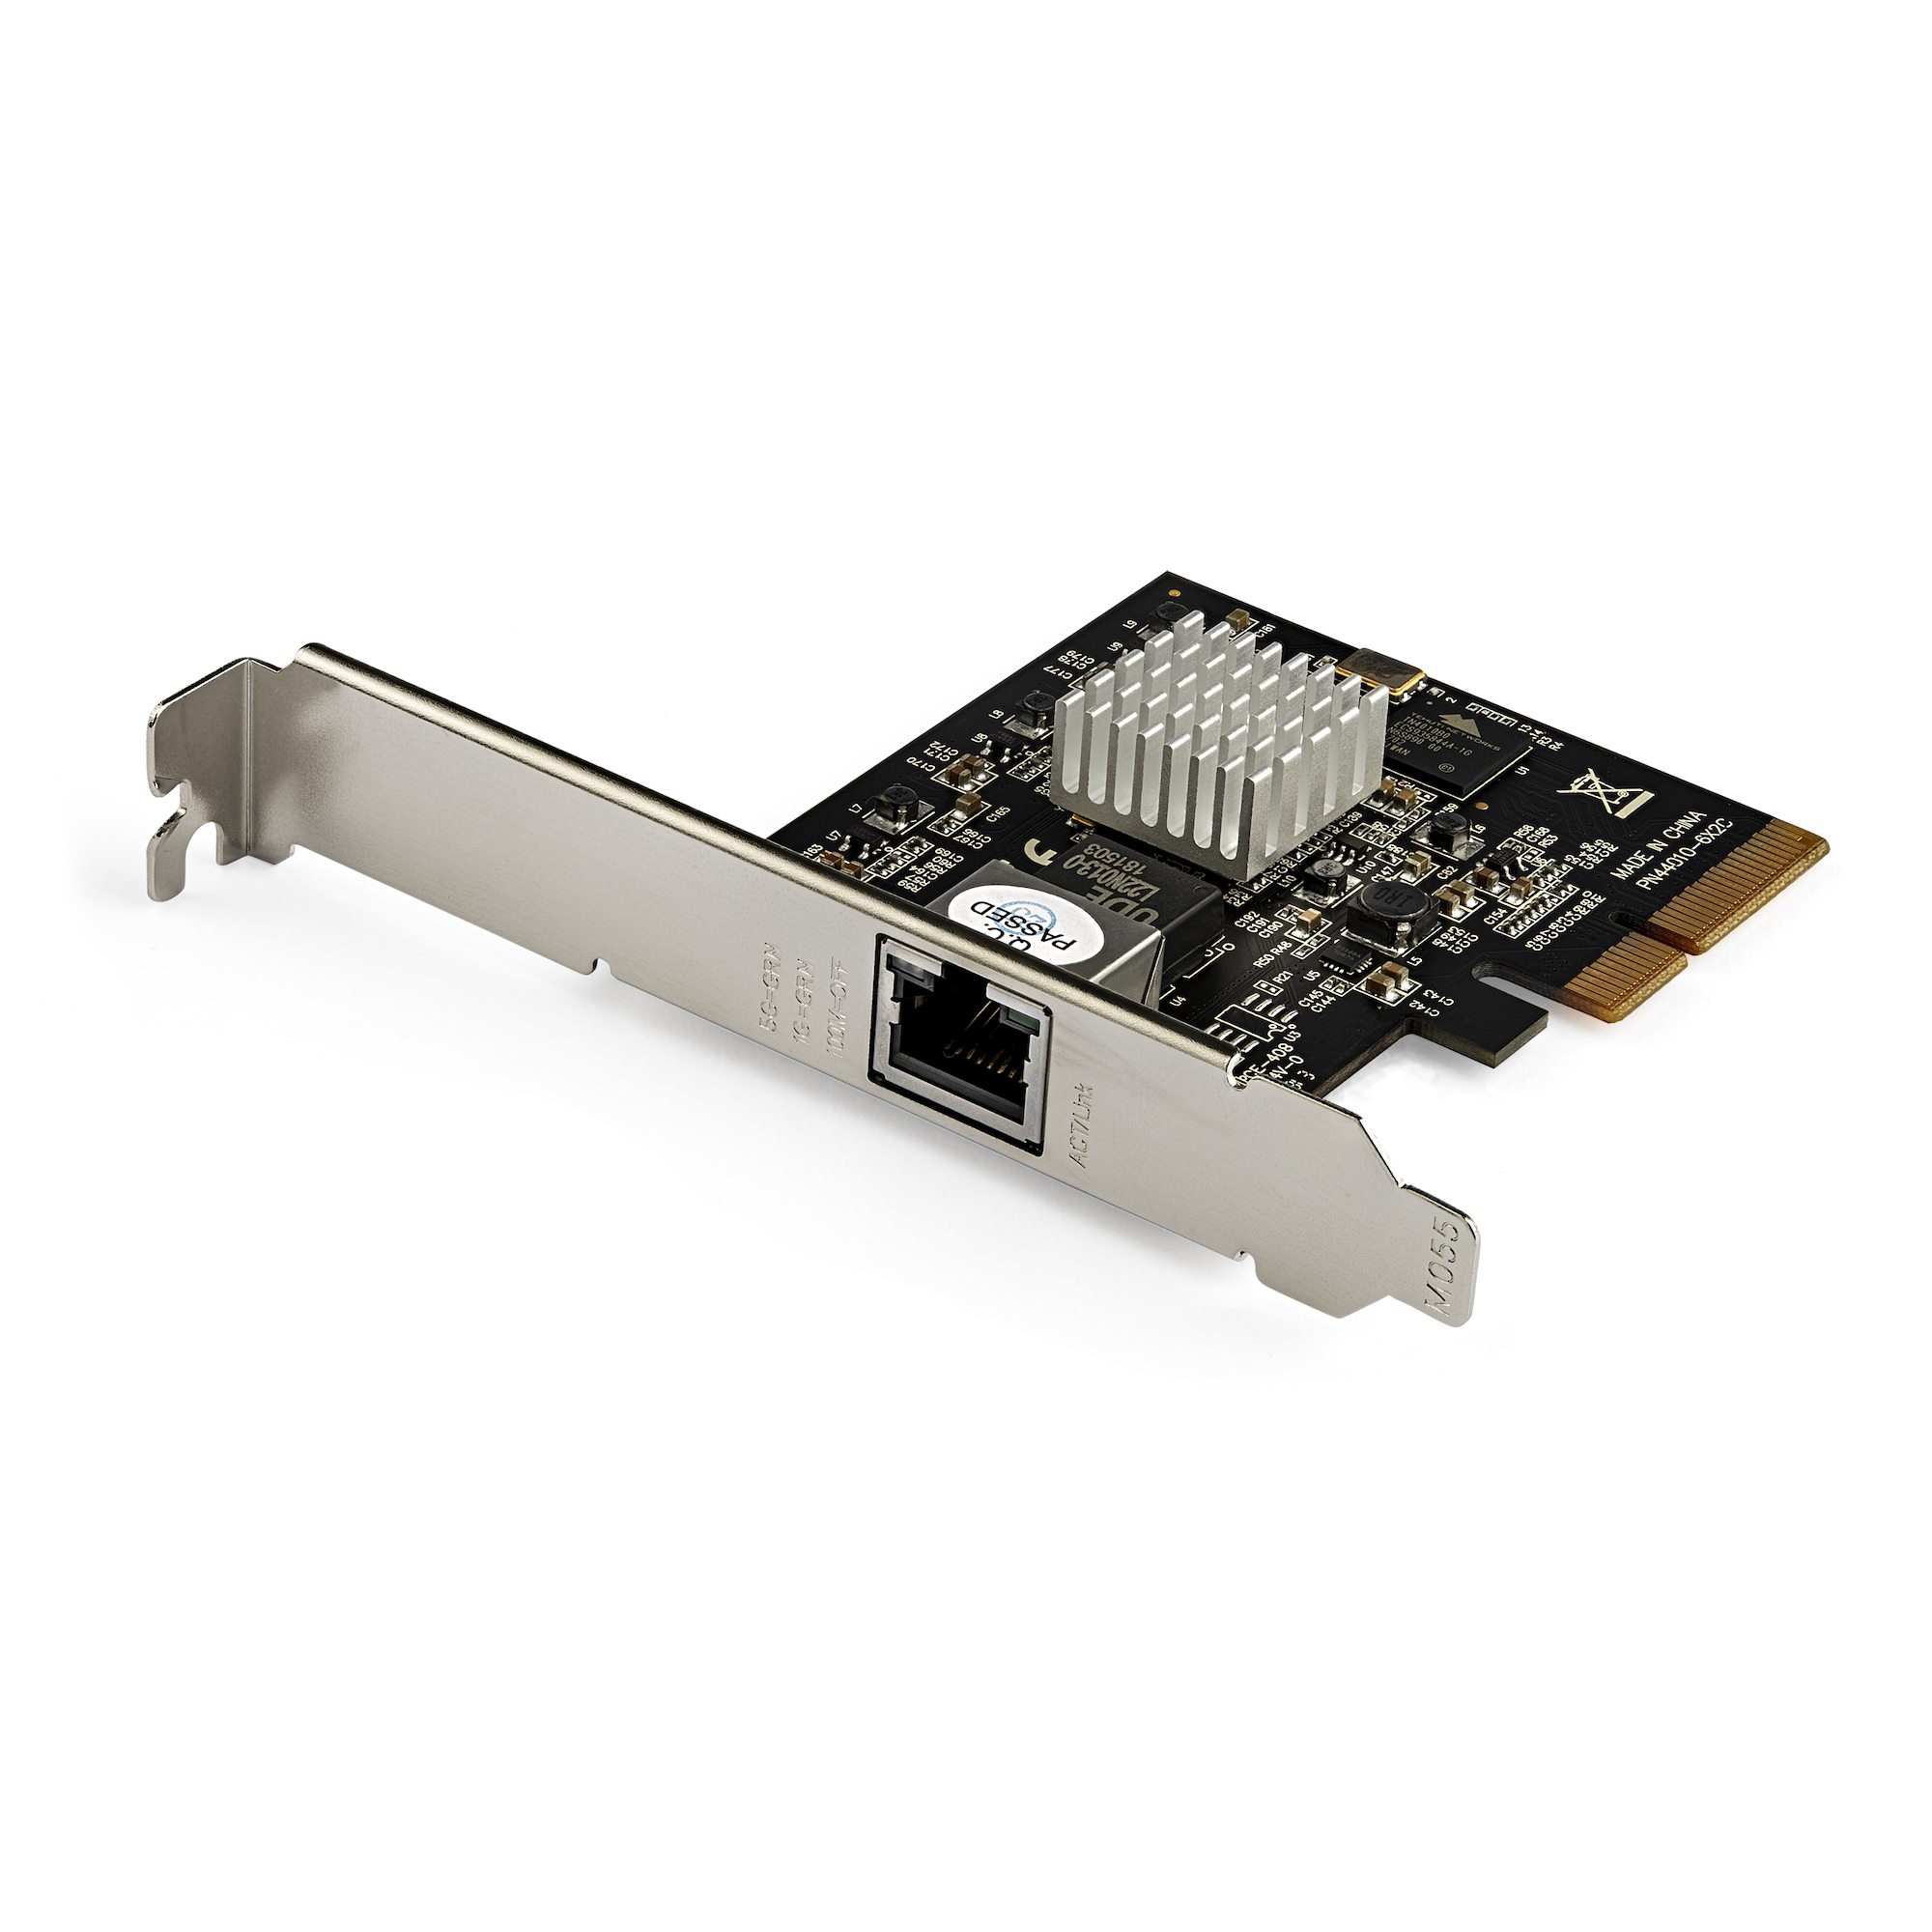 $44 5G M.2 to Ethernet and USB converter takes M.2 5G PCIe